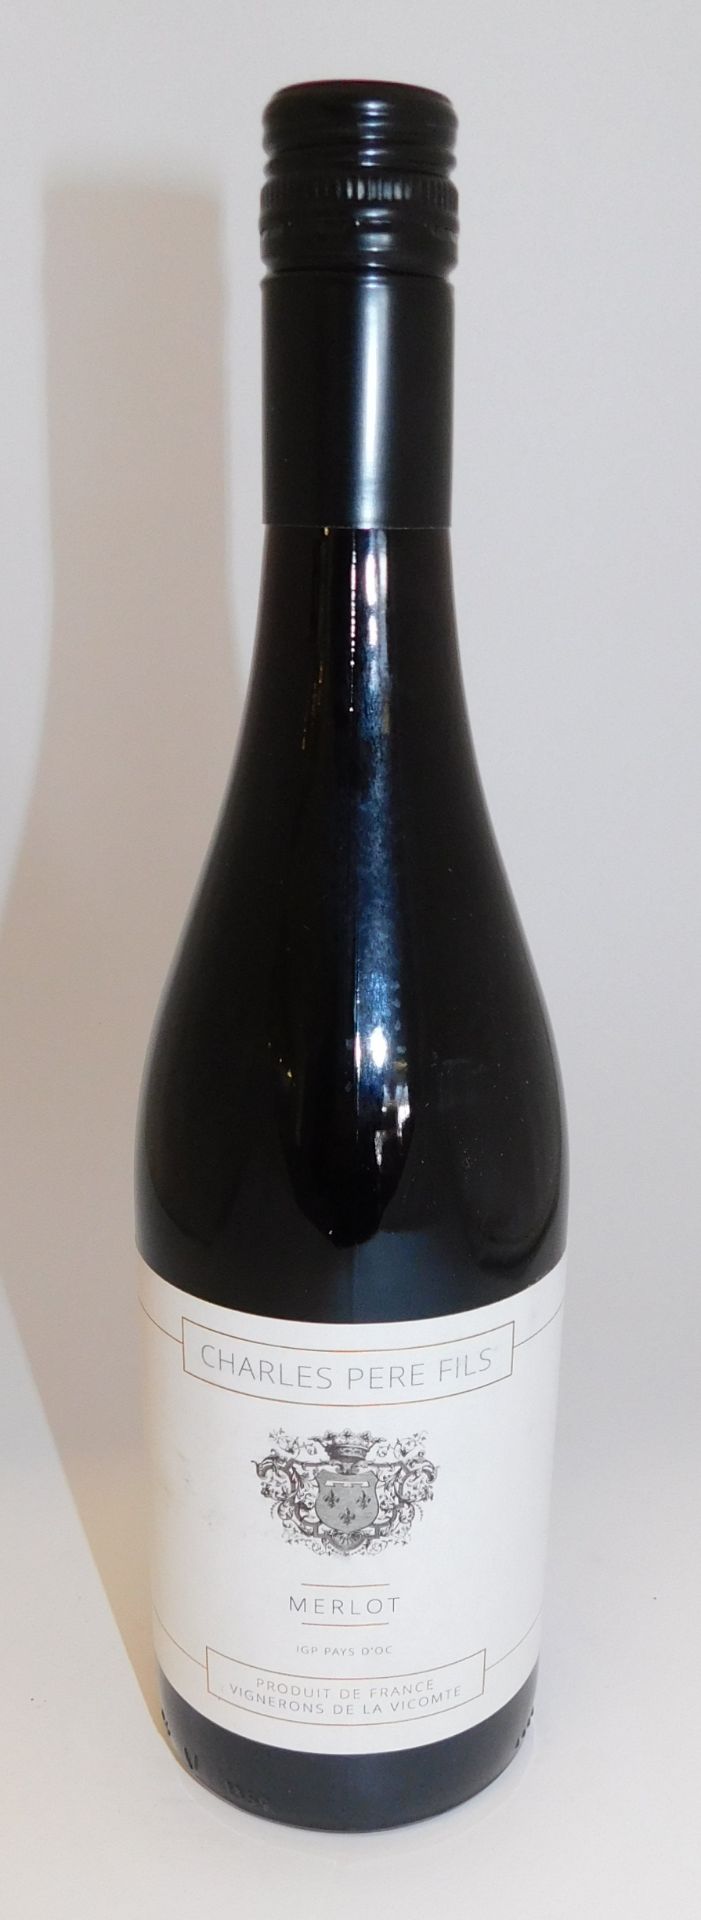 24 Bottles of Charles Pere Fils Merlot, 75cl (Located Stockport – See General Notes for More